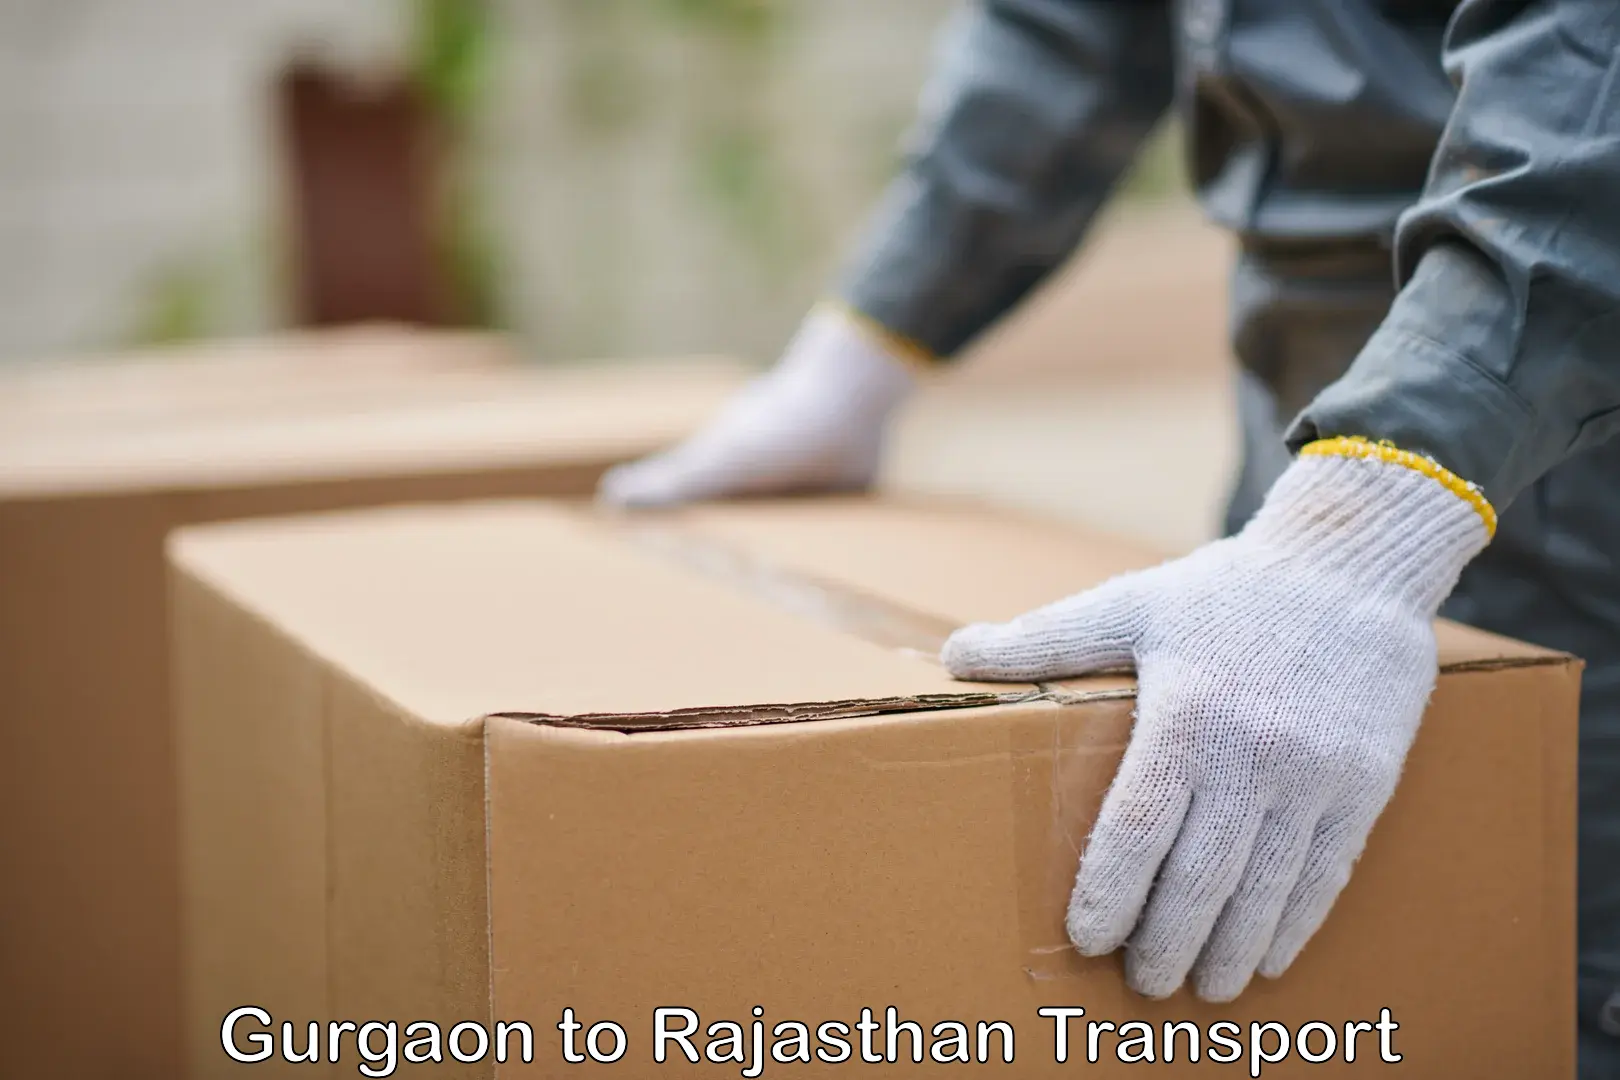 Truck transport companies in India Gurgaon to Rajasthan